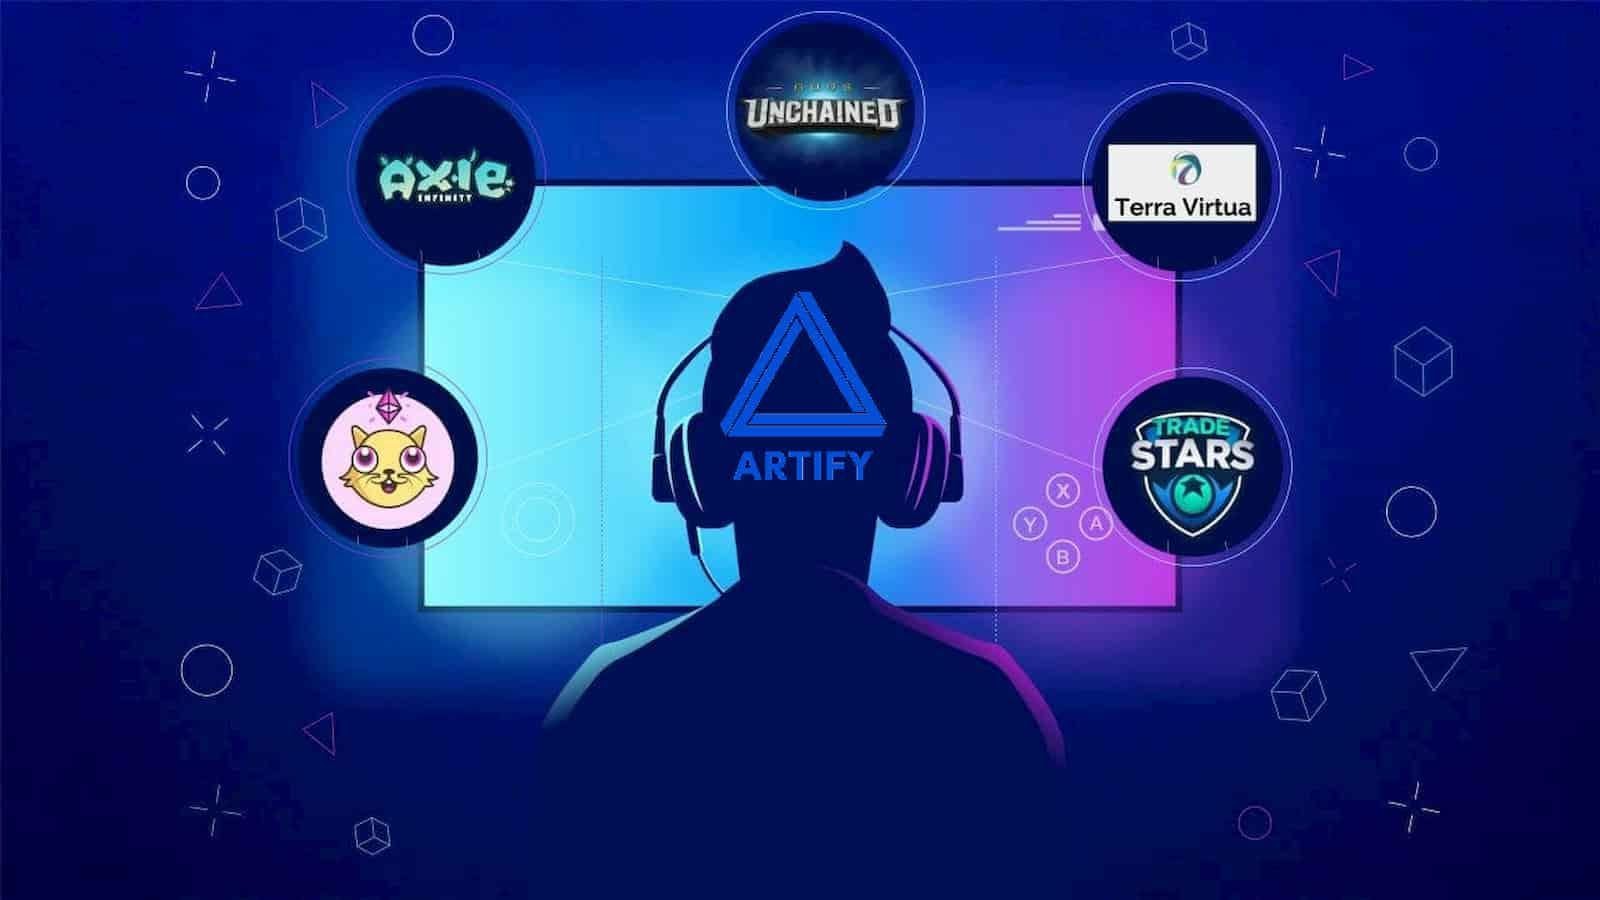 Artify Network, Friday, September 10, 2021, Press release picture